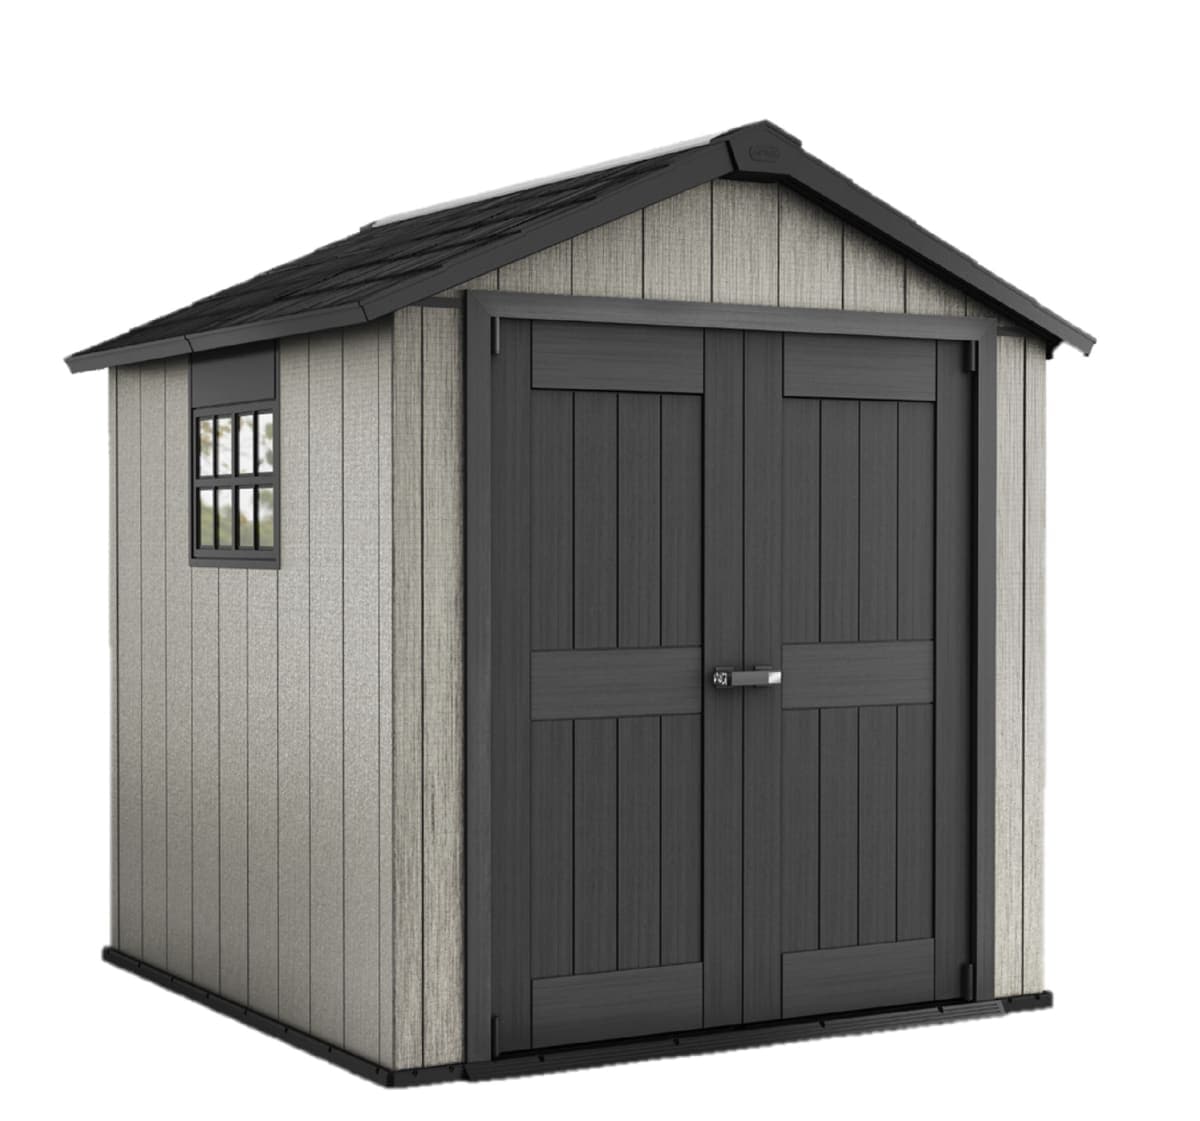 GARDEN SHED OAKLAND 757 THICKNESS 20MM EXTERNAL DIMENSIONS 210X206X242H FLOOR INCLUDED